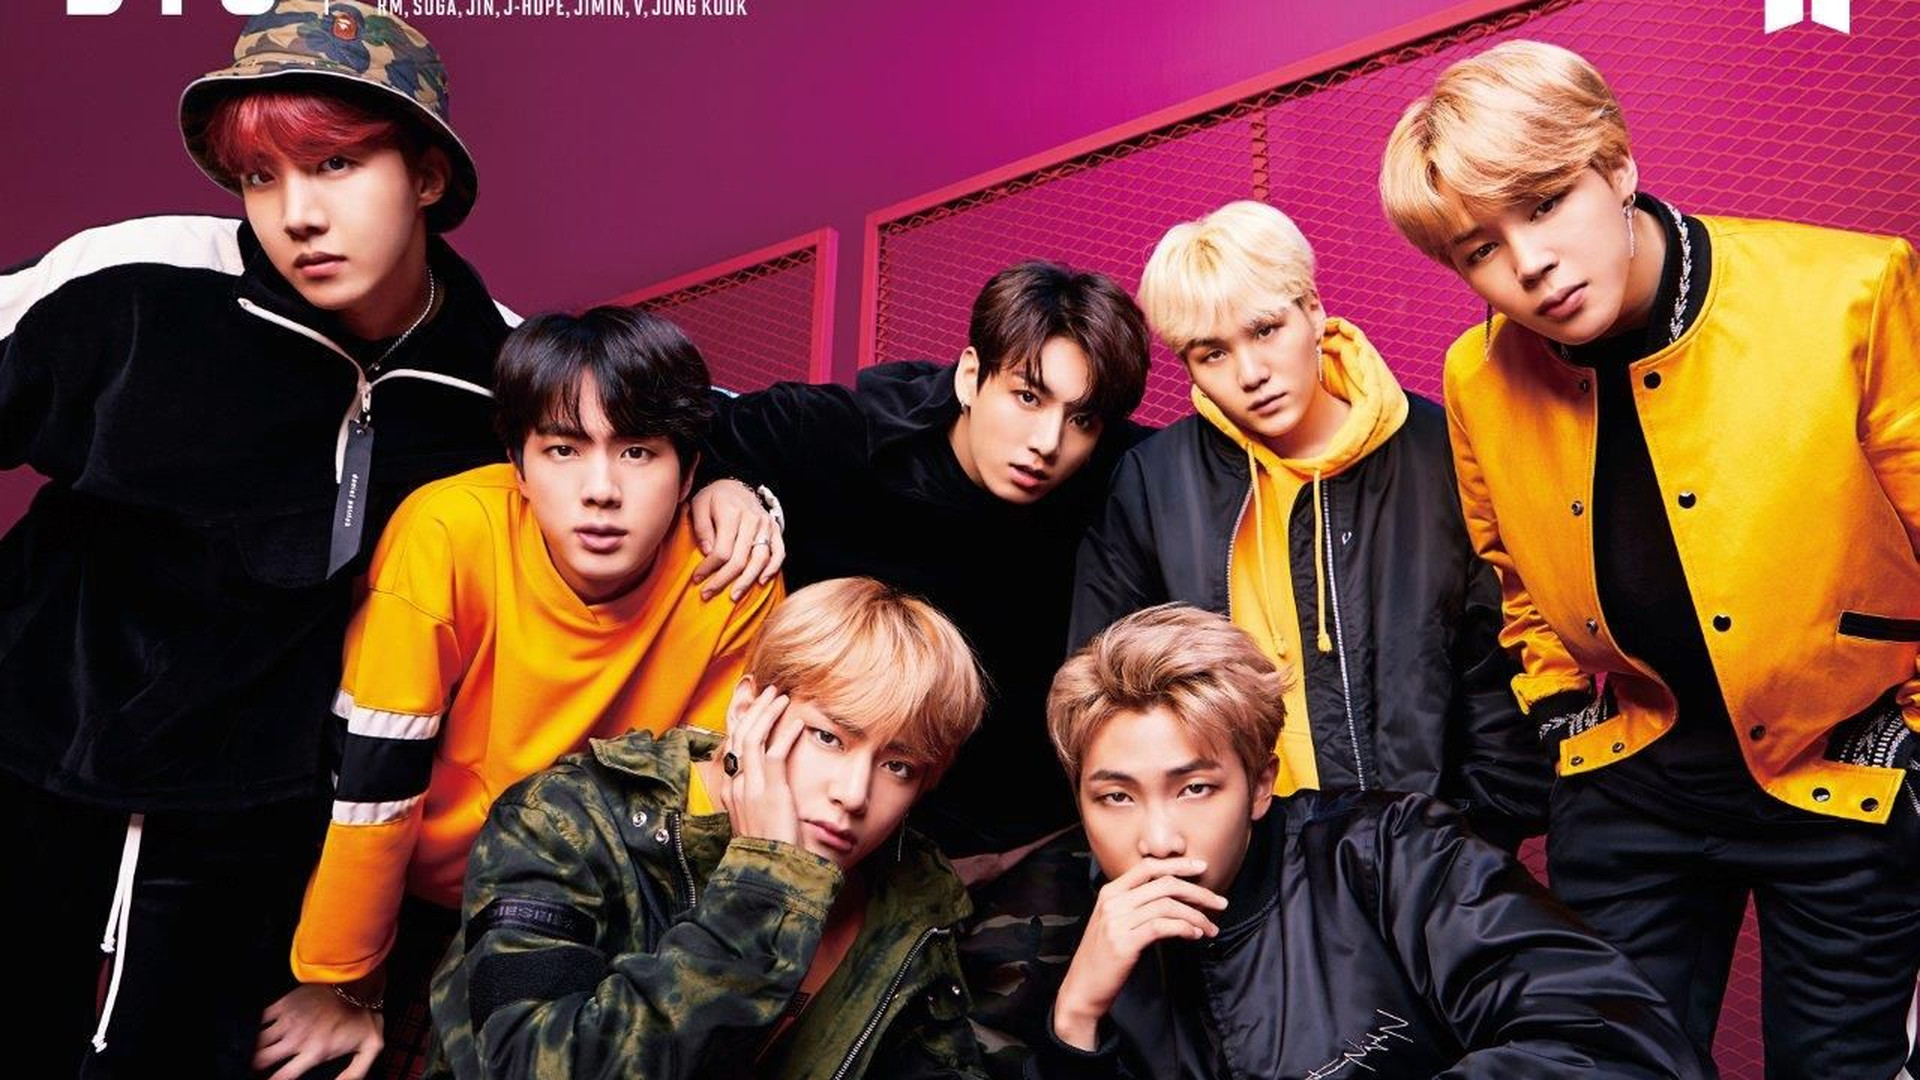 Bts Laptop Wallpaper and HD Background free download on PicGaGa